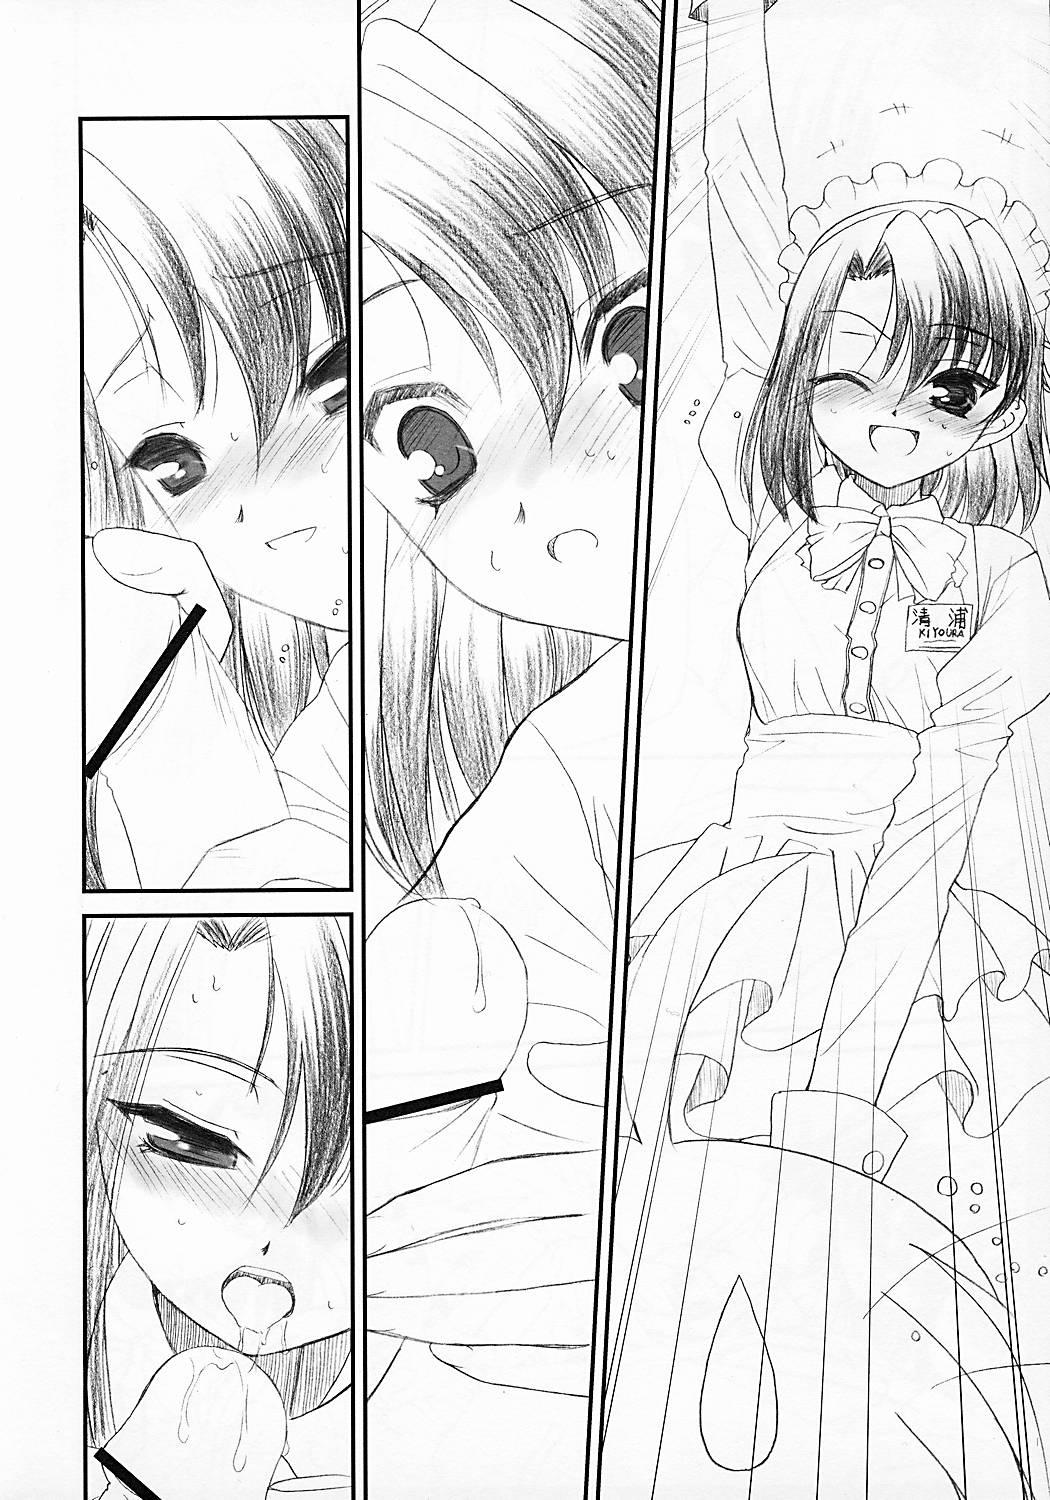 Creampie Secchan no Himichu - Prototype ver. 0.01 - School days Hot Pussy - Page 4